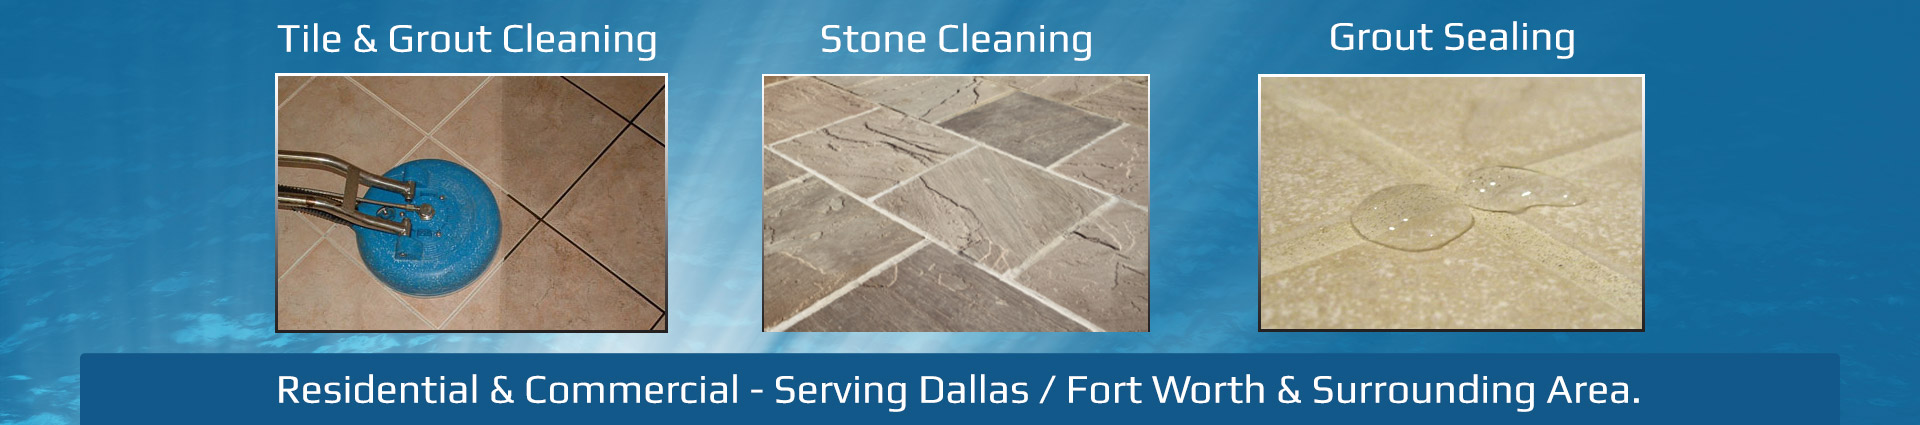 Tile & Grout Cleaning Fort Worth TX